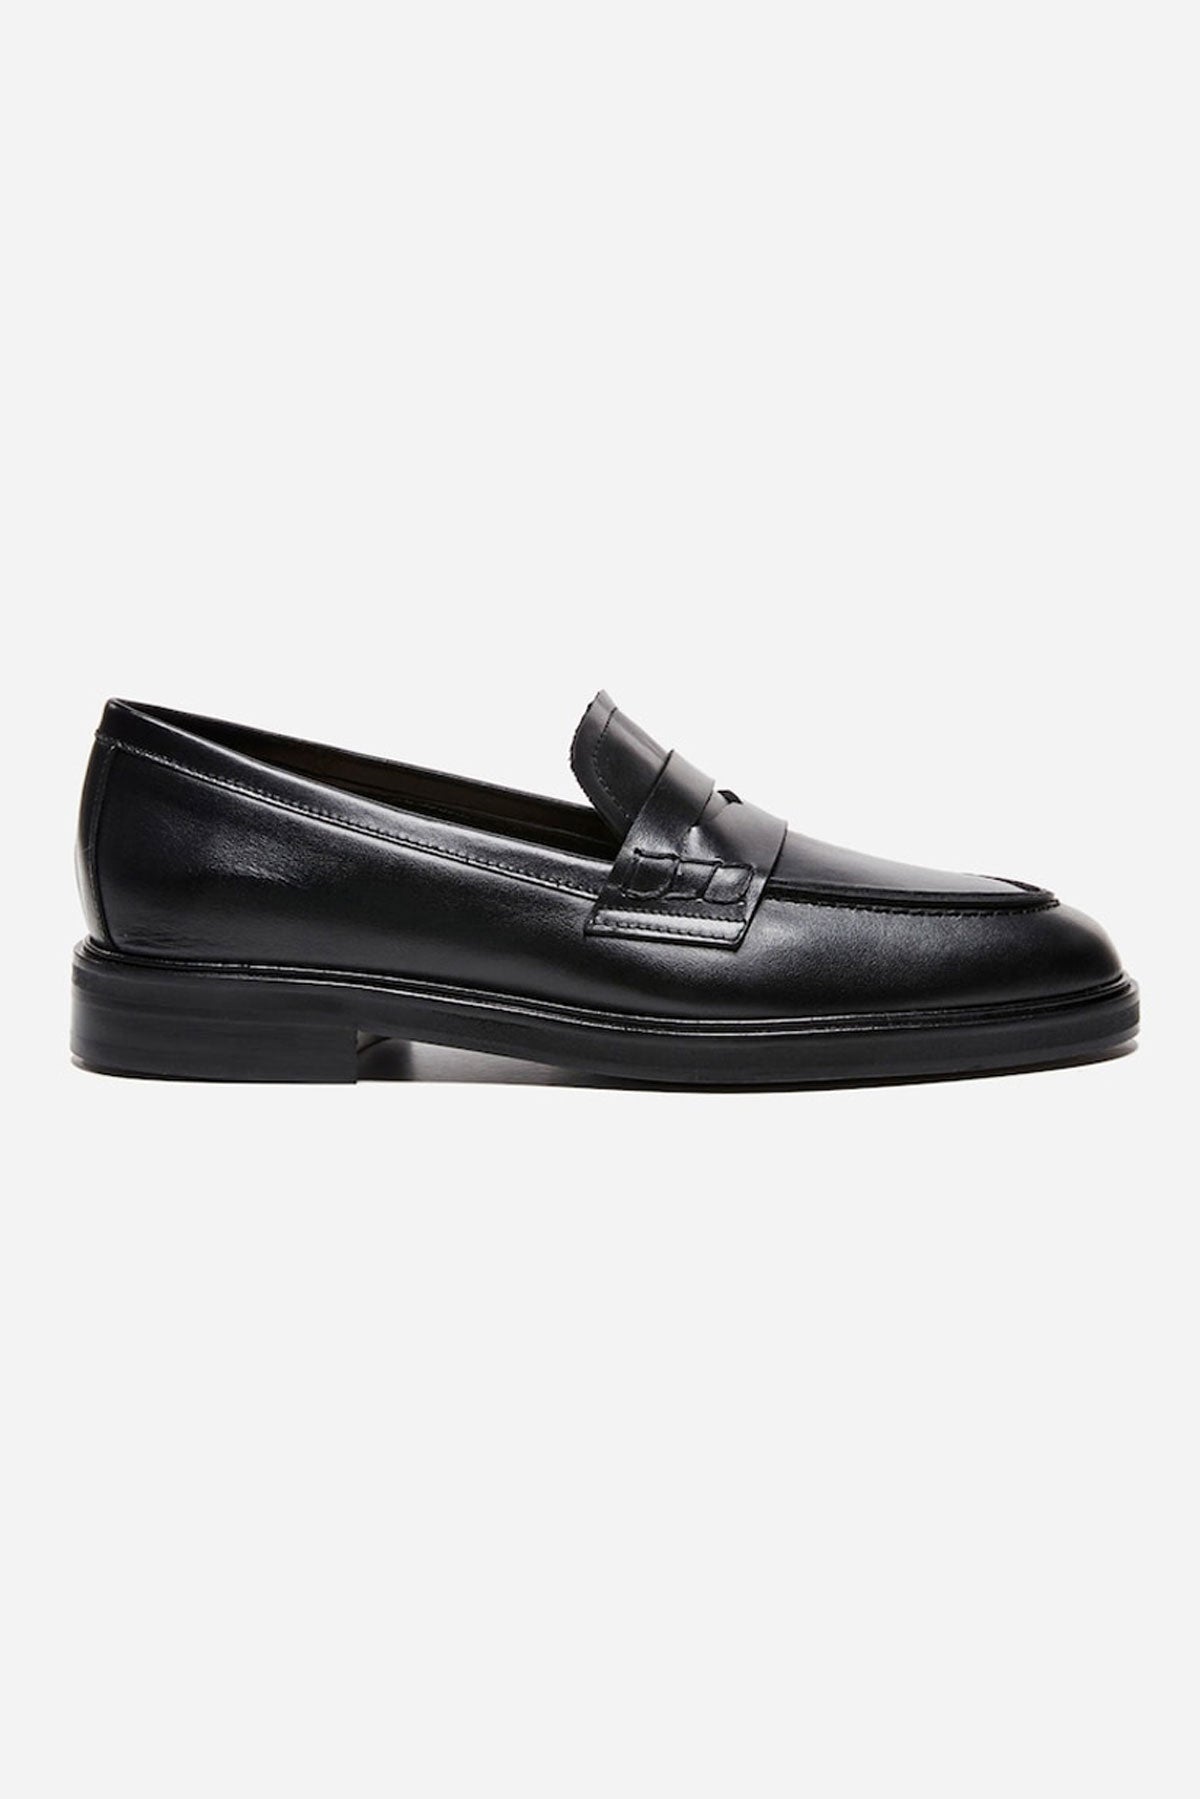 ROWIE The Label - Sara Leather Loafer Noir - Flattered